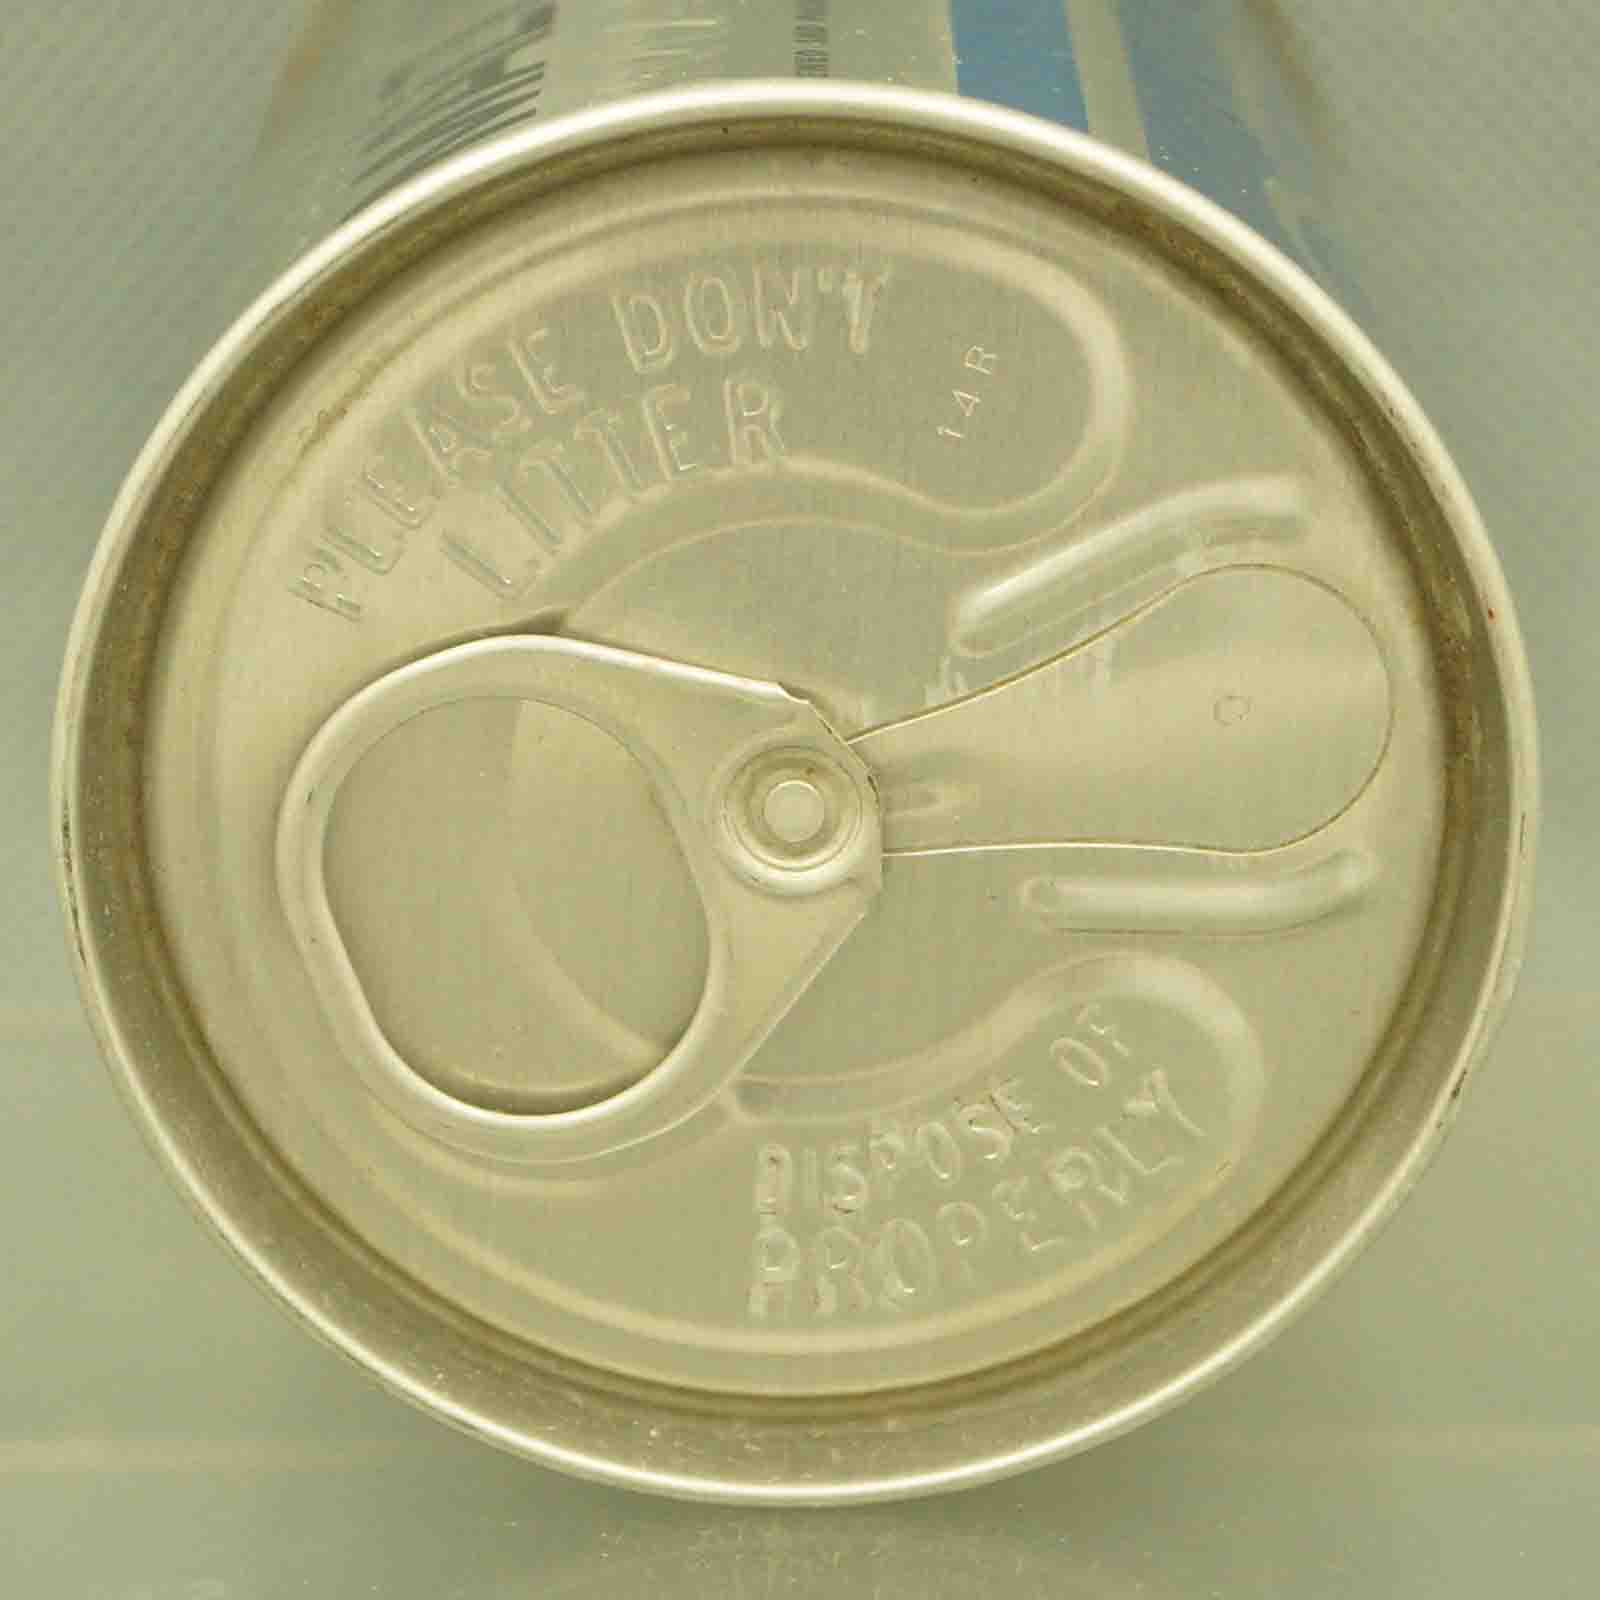 GBX 67-17 pull tab beer can 5